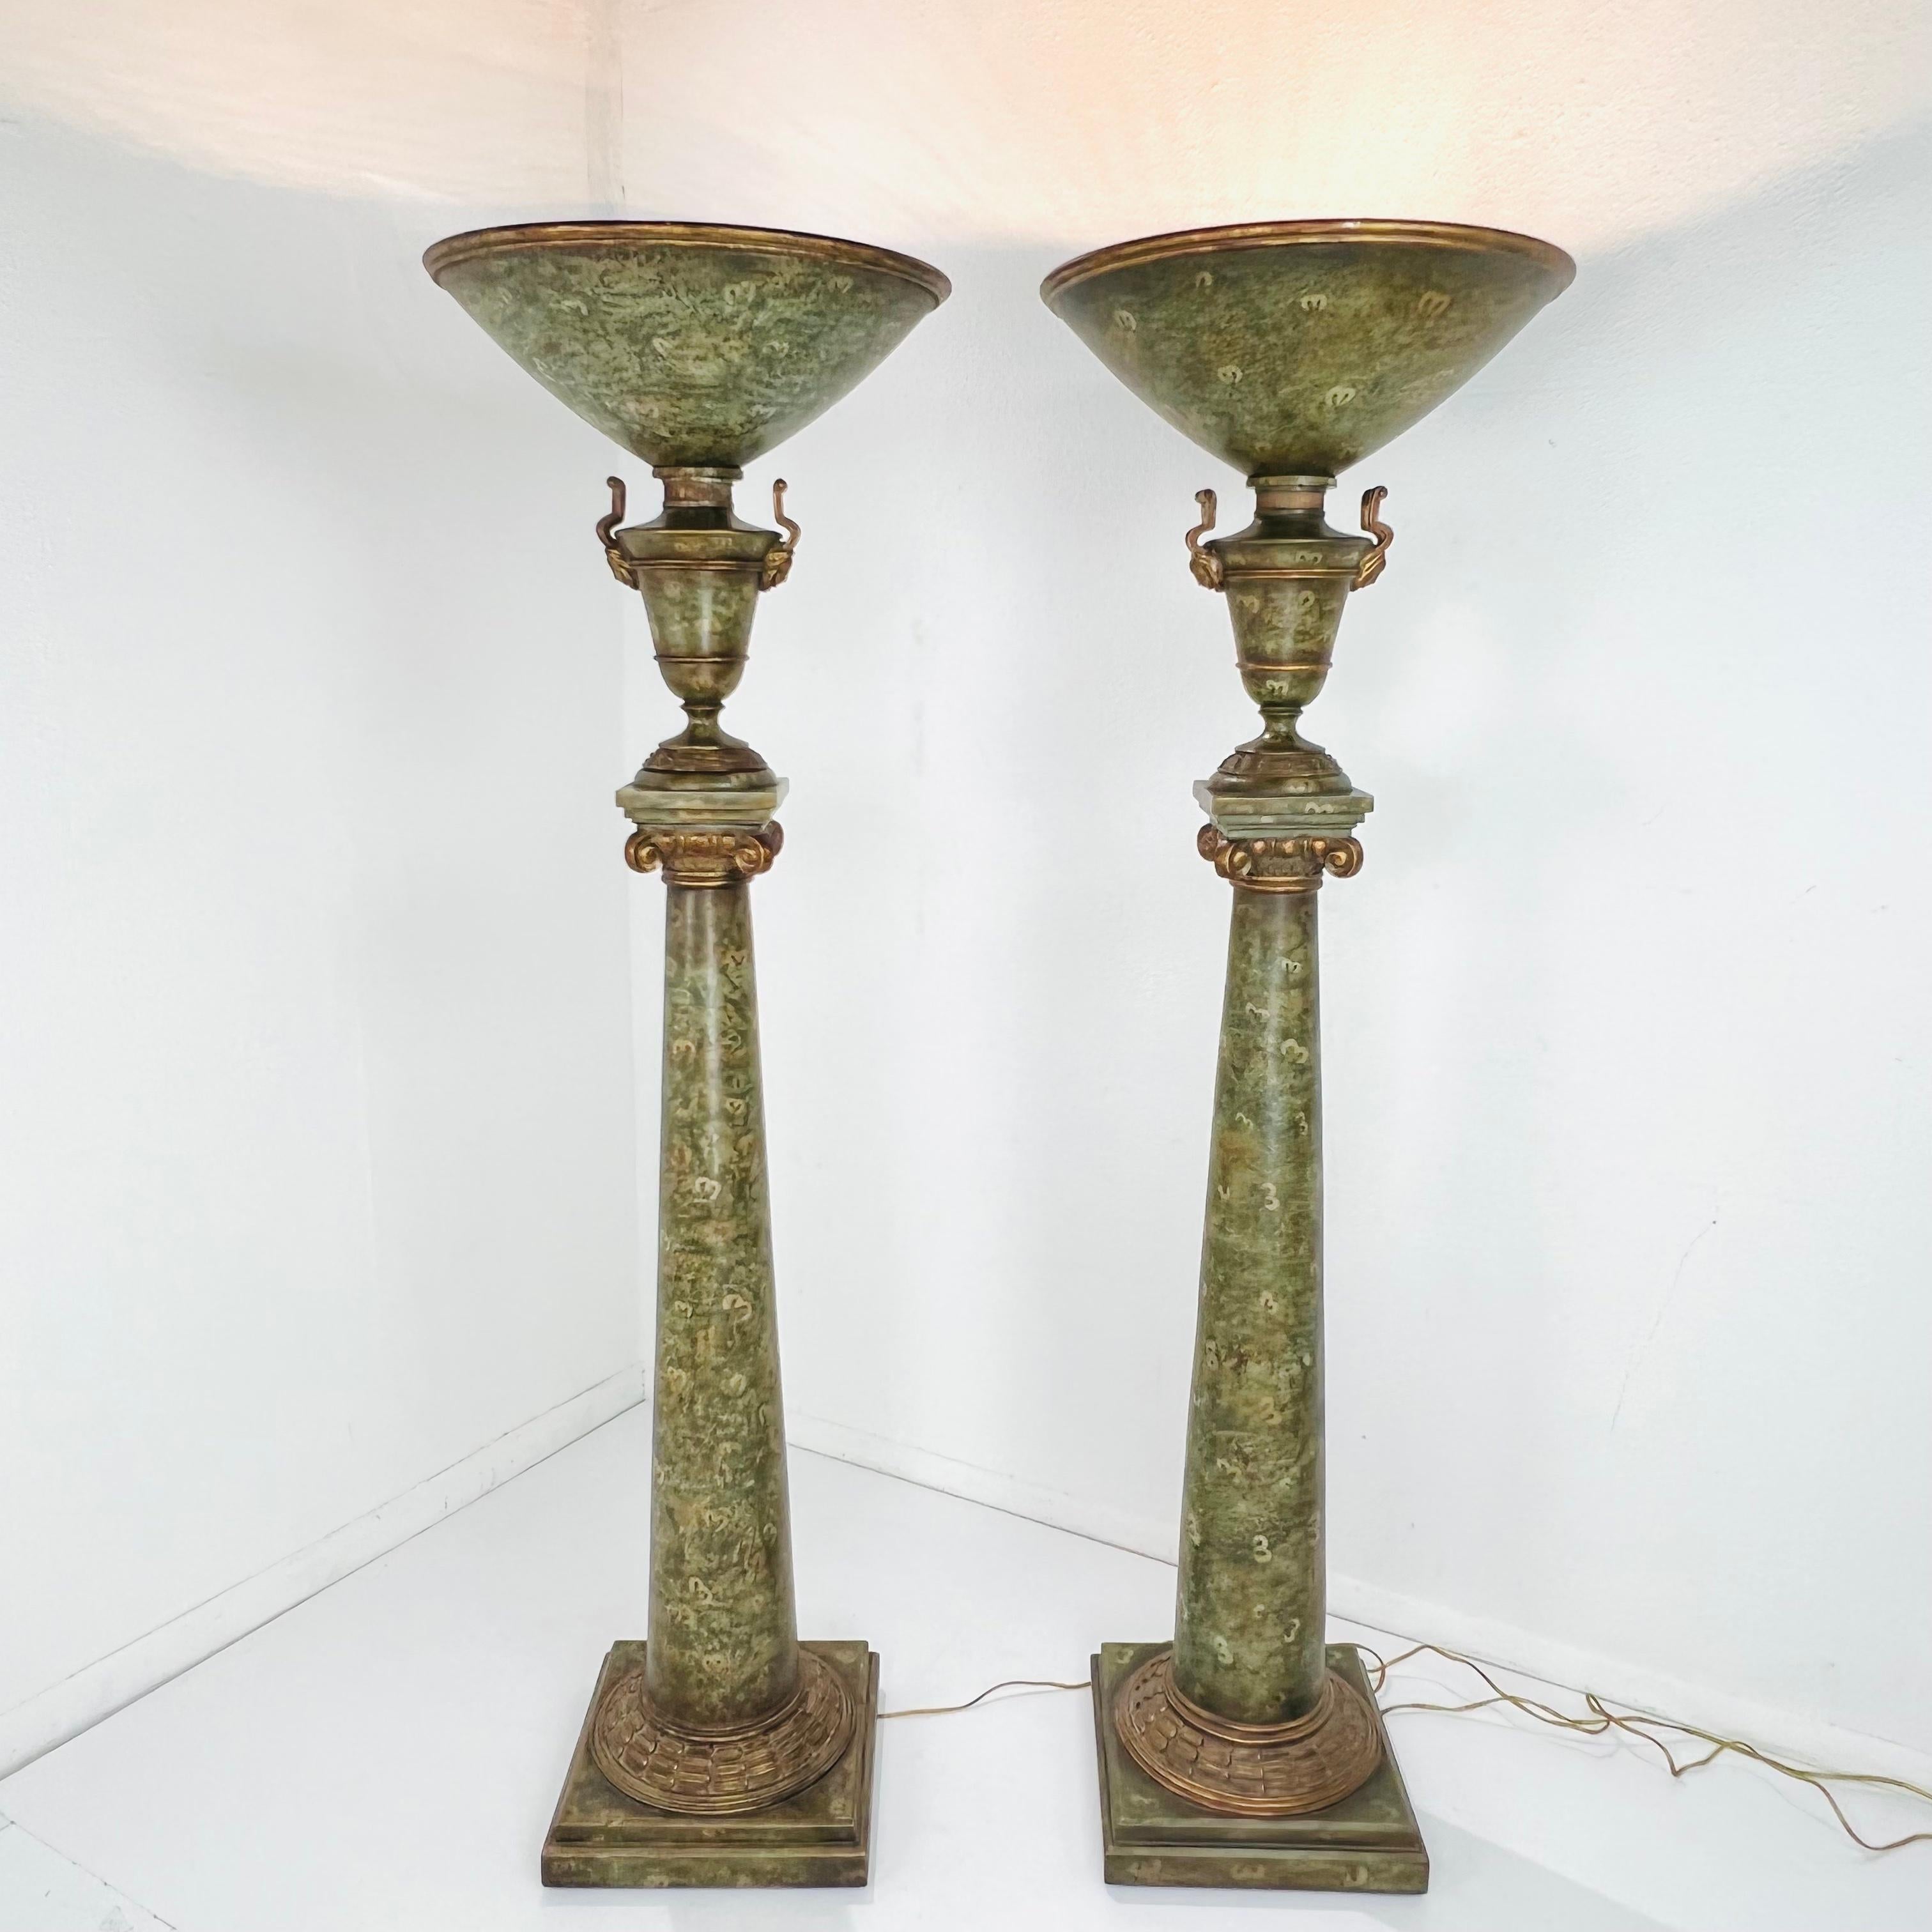 Neoclassical Pair of Monumental Venetian Torchiere Floor Lamps For Sale